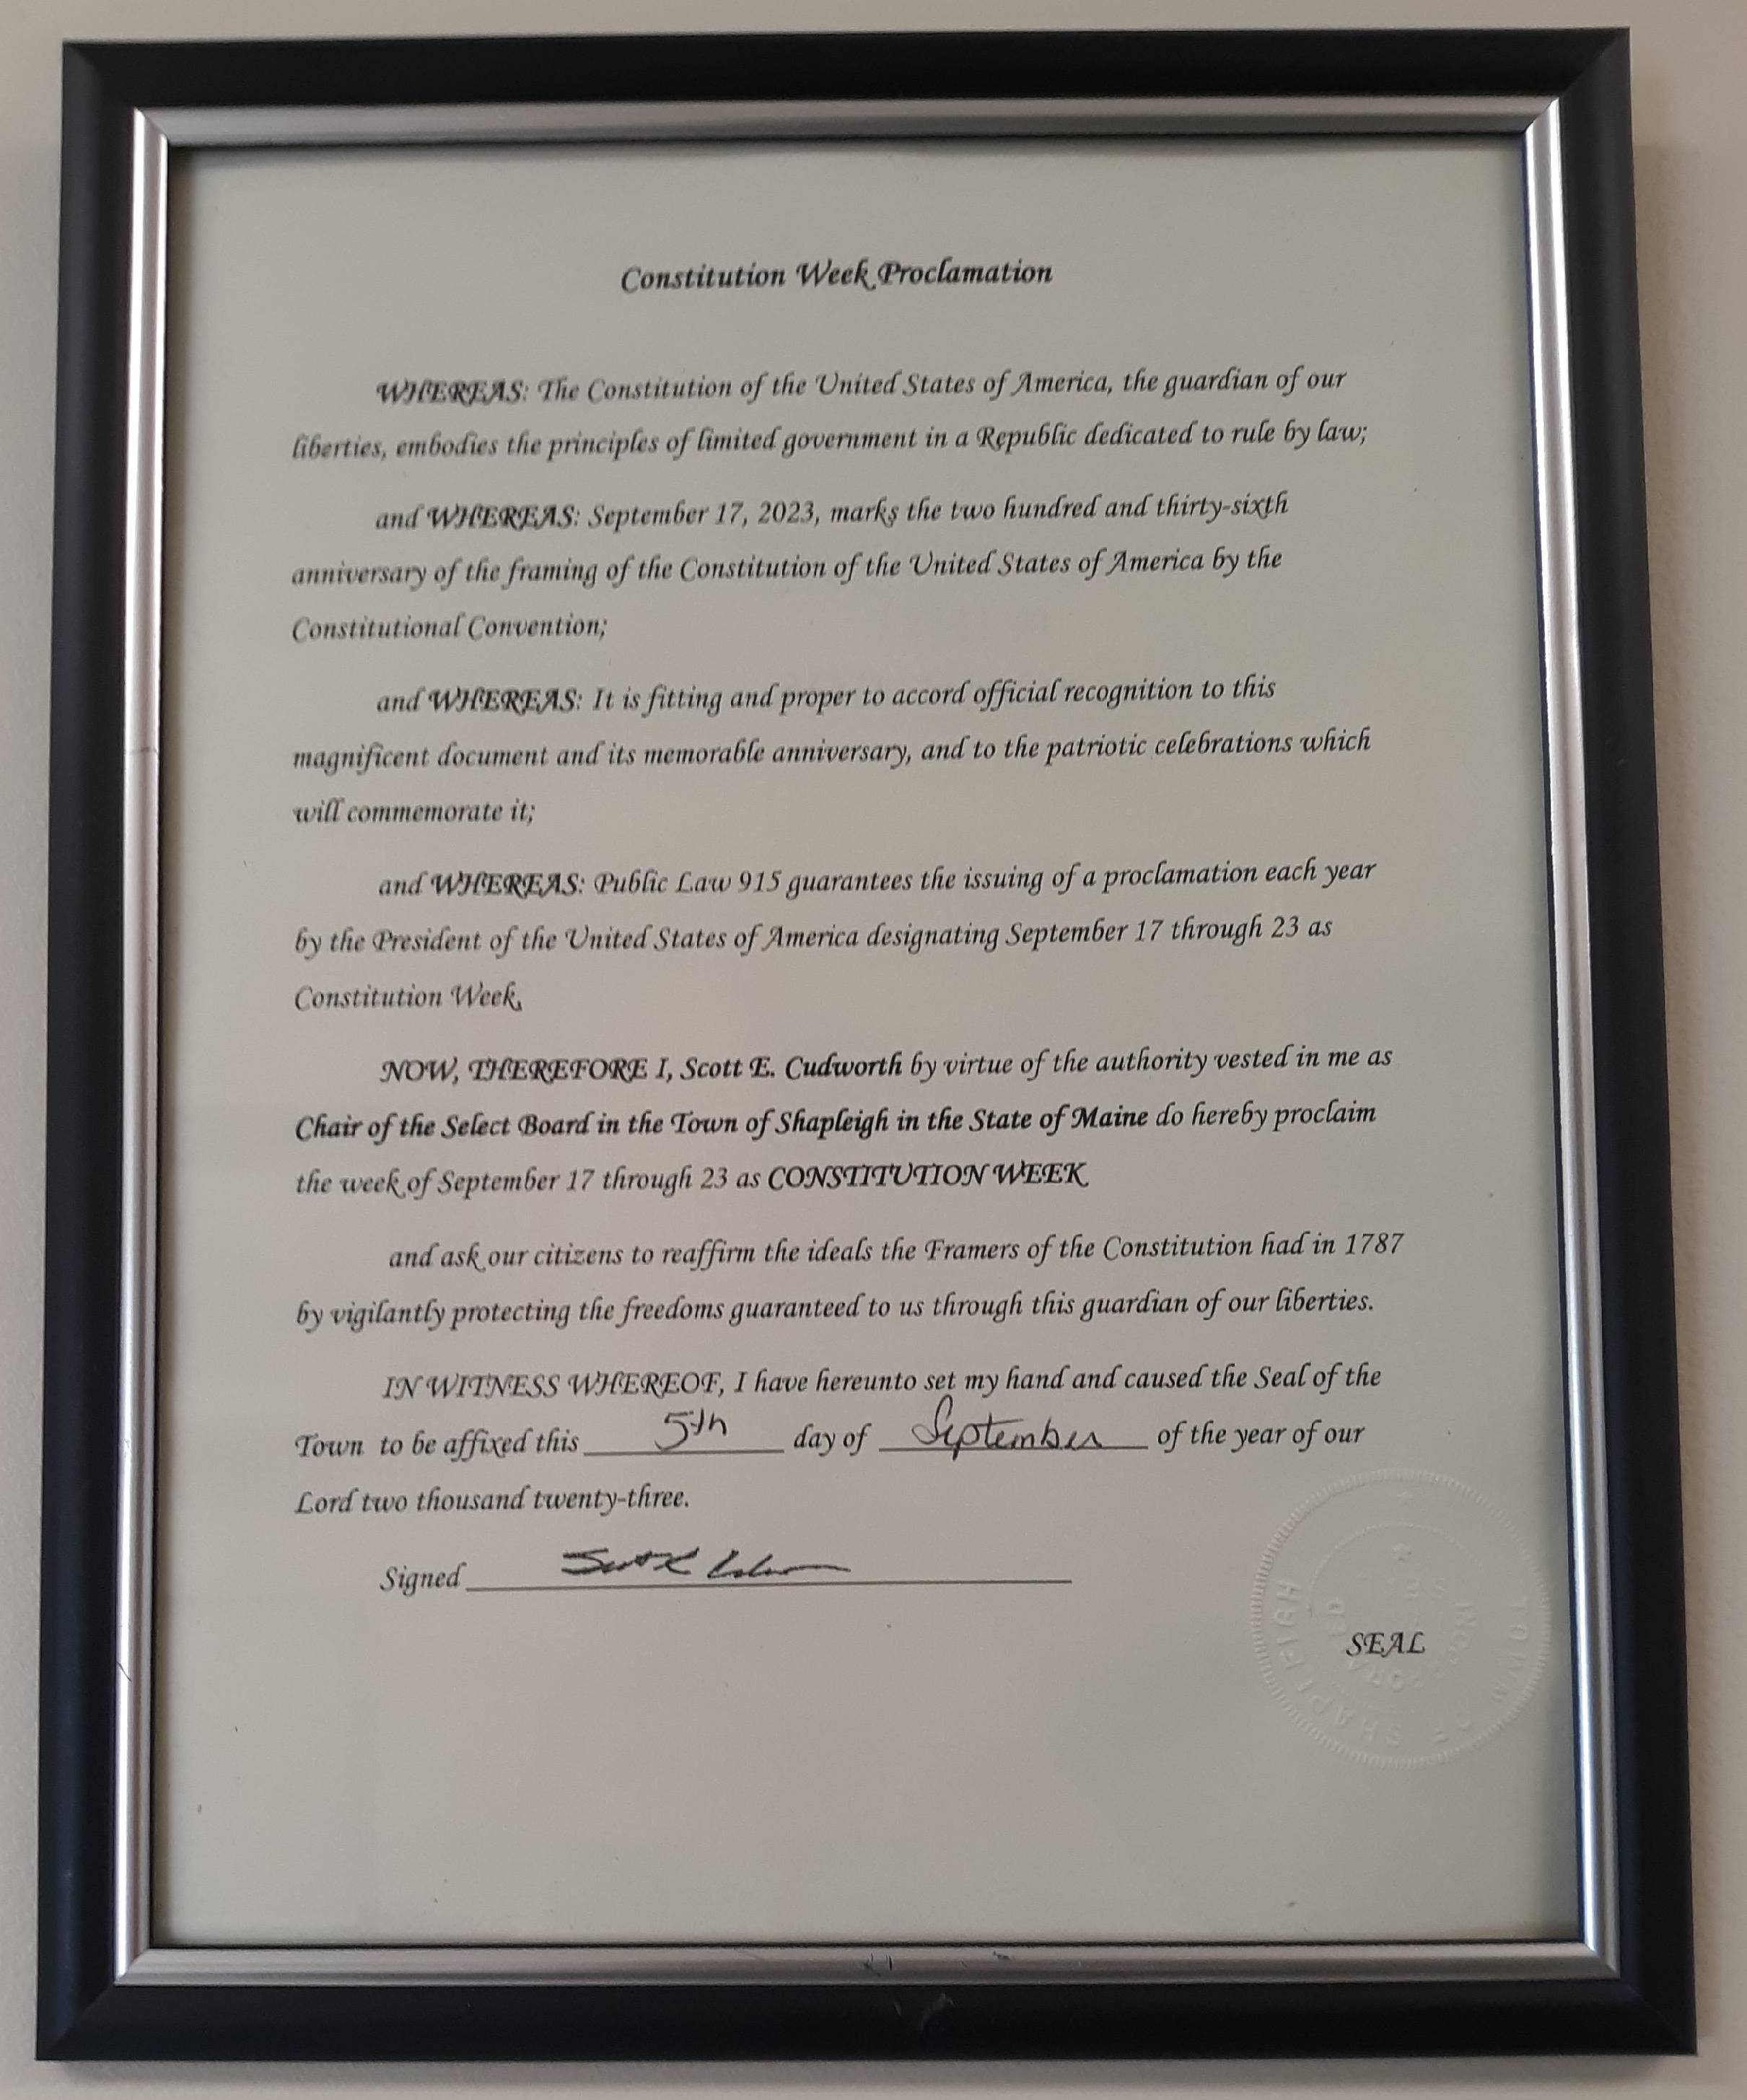 Consititution Proclamation Week 2023 - Copy